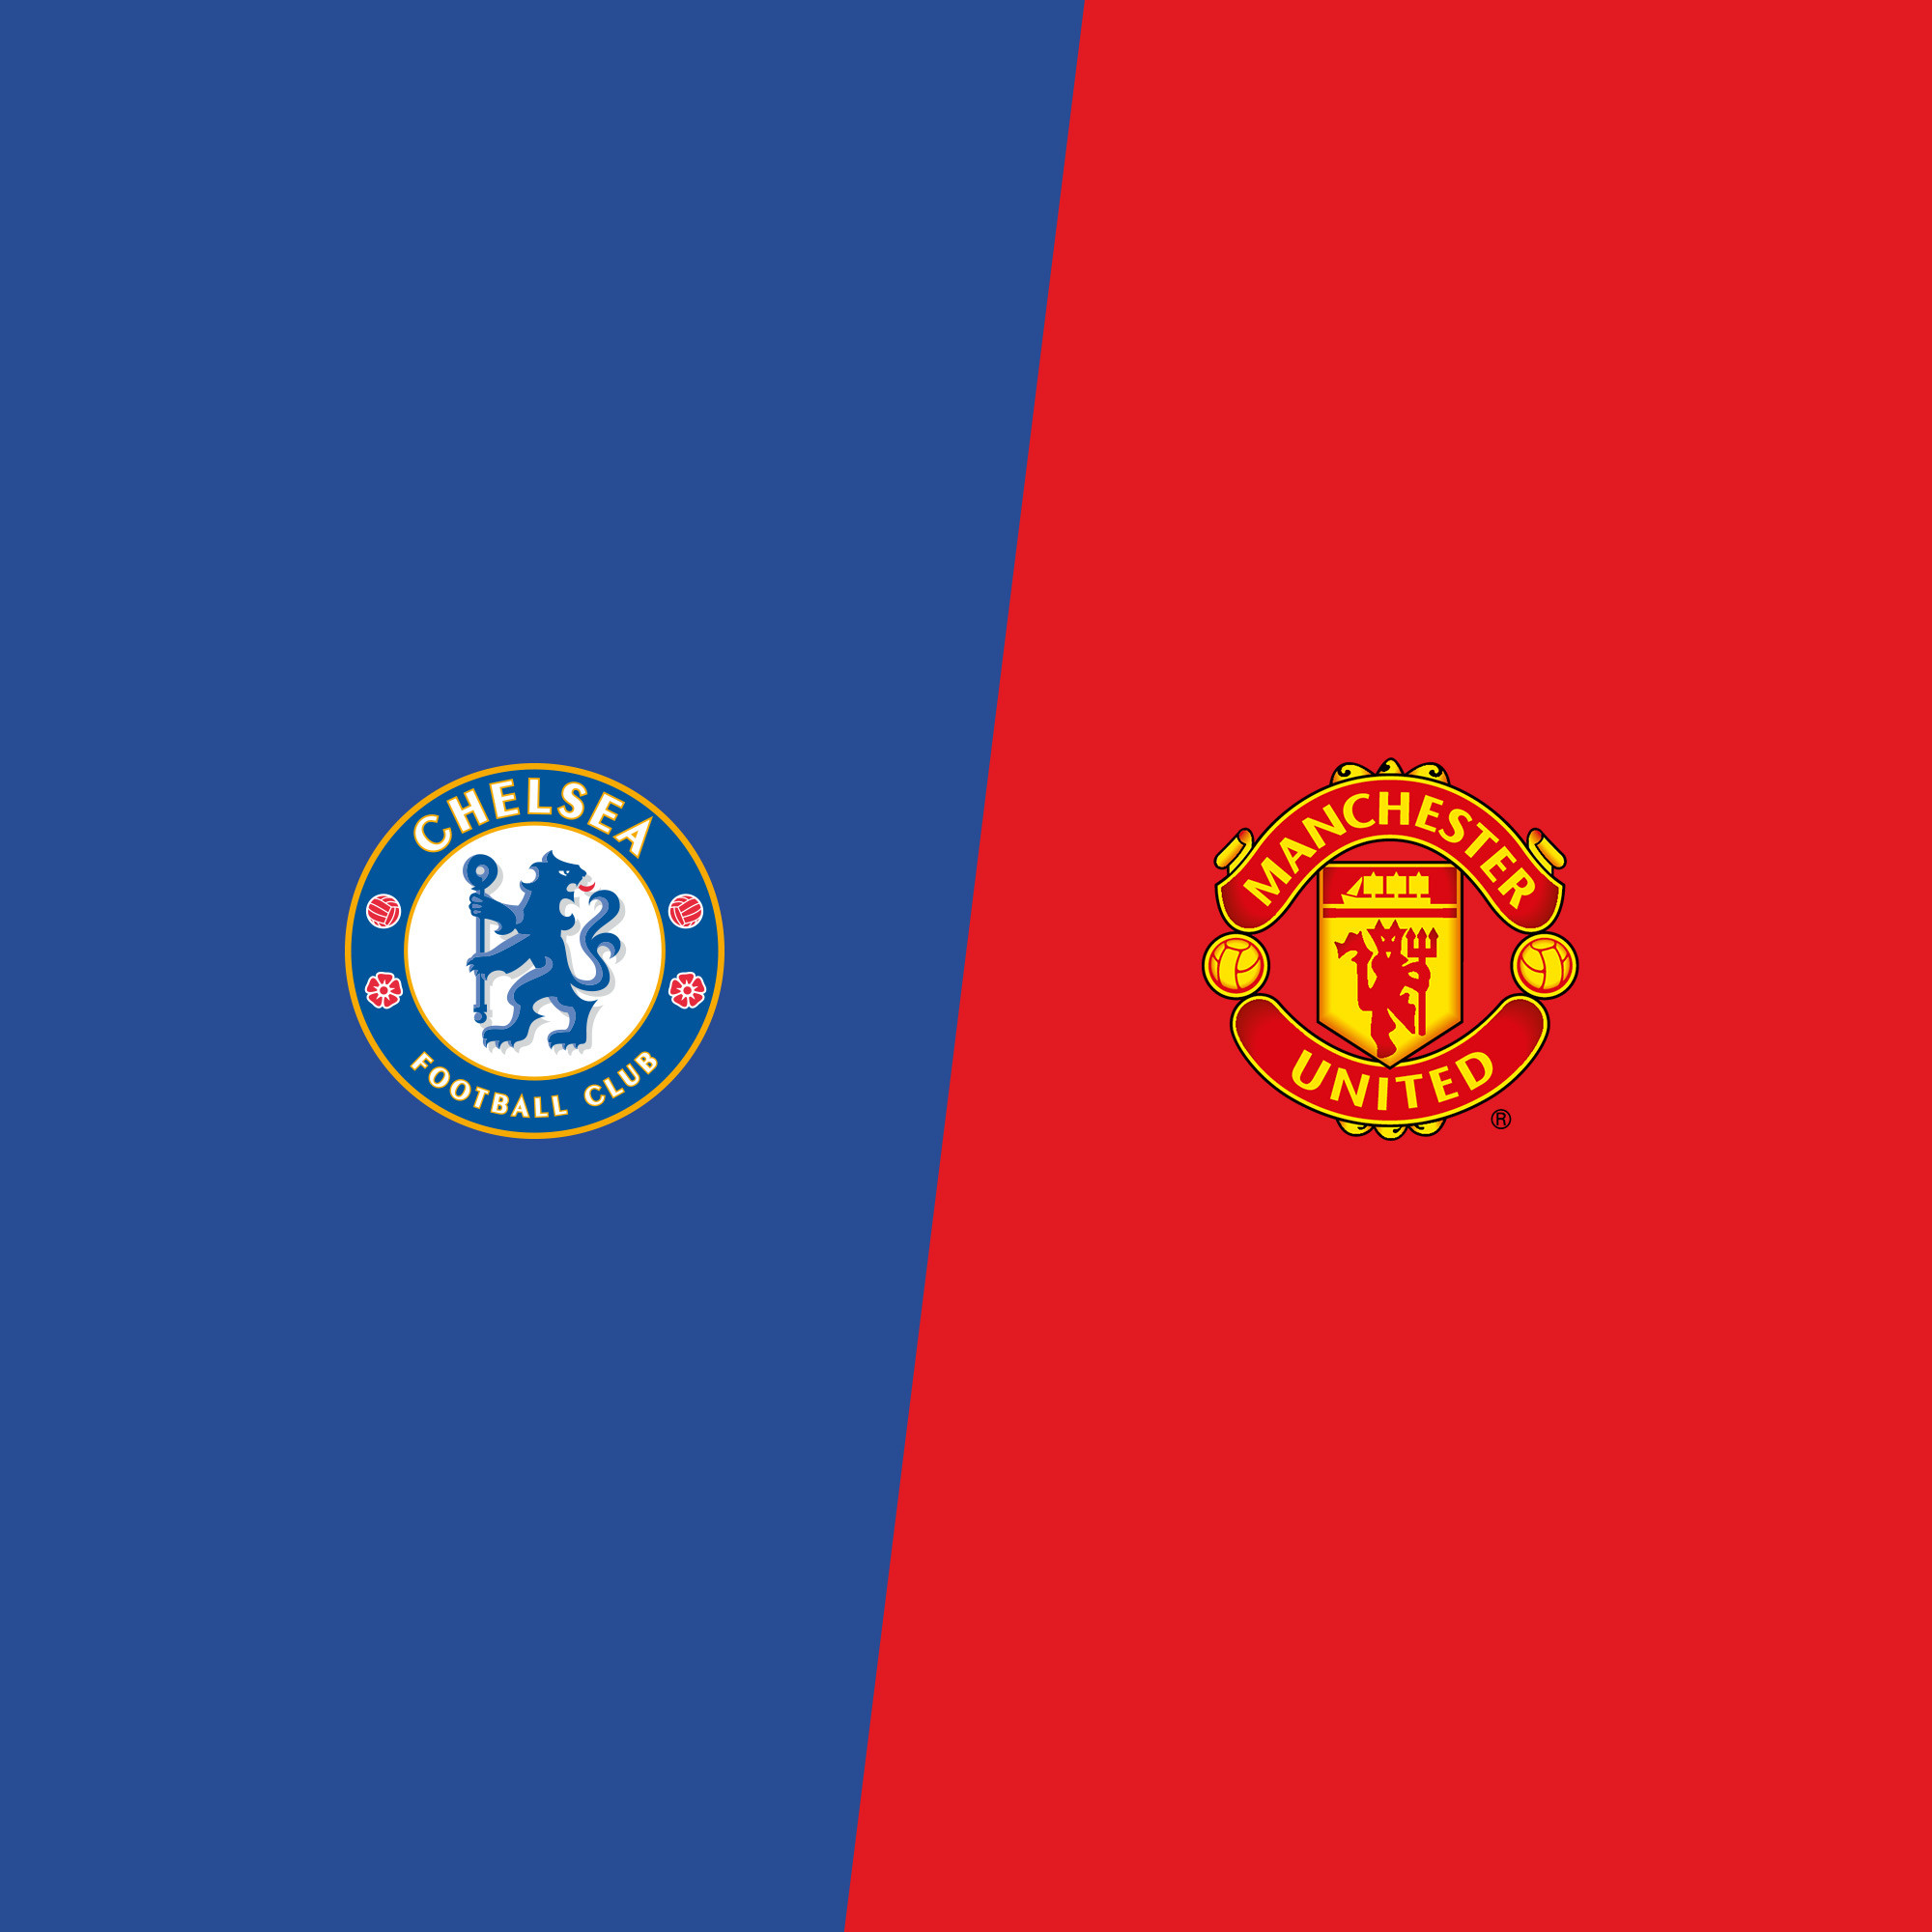 2000x2000 Preview: Chelsea v Manchester United - Official Manchester United Website